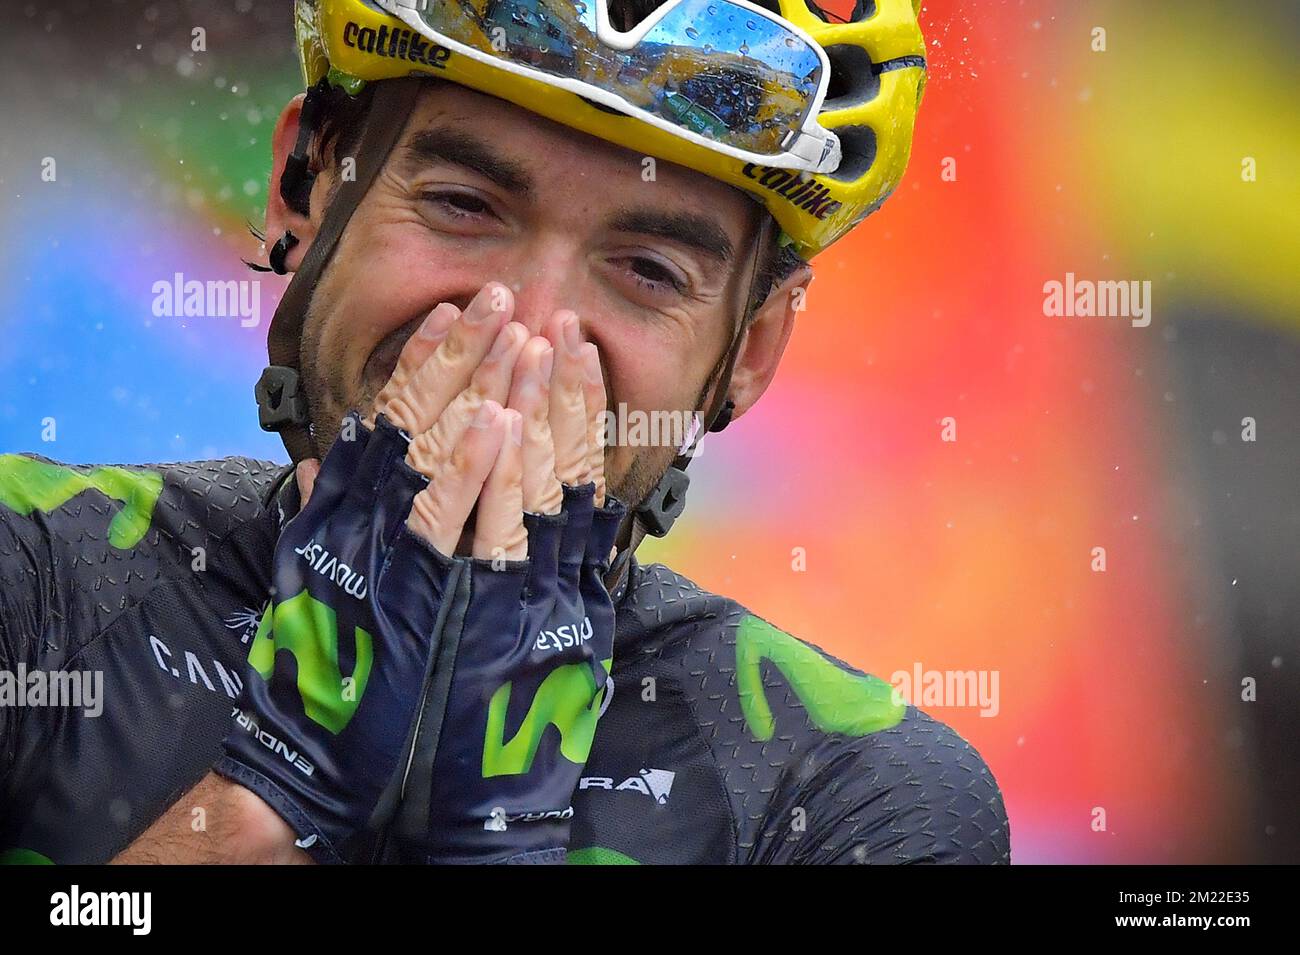 Spanish Ion Izagirre of Movistar Team celebrates as he crosses the finish line to win the 20th stage at the 103rd edition of the Tour de France cycling race, 146,5 km from Megeve to Morzine, France, on Saturday 23 July 2016. This year's Tour de France takes place from July 2nd to July 24th. BELGA PHOTO  Stock Photo